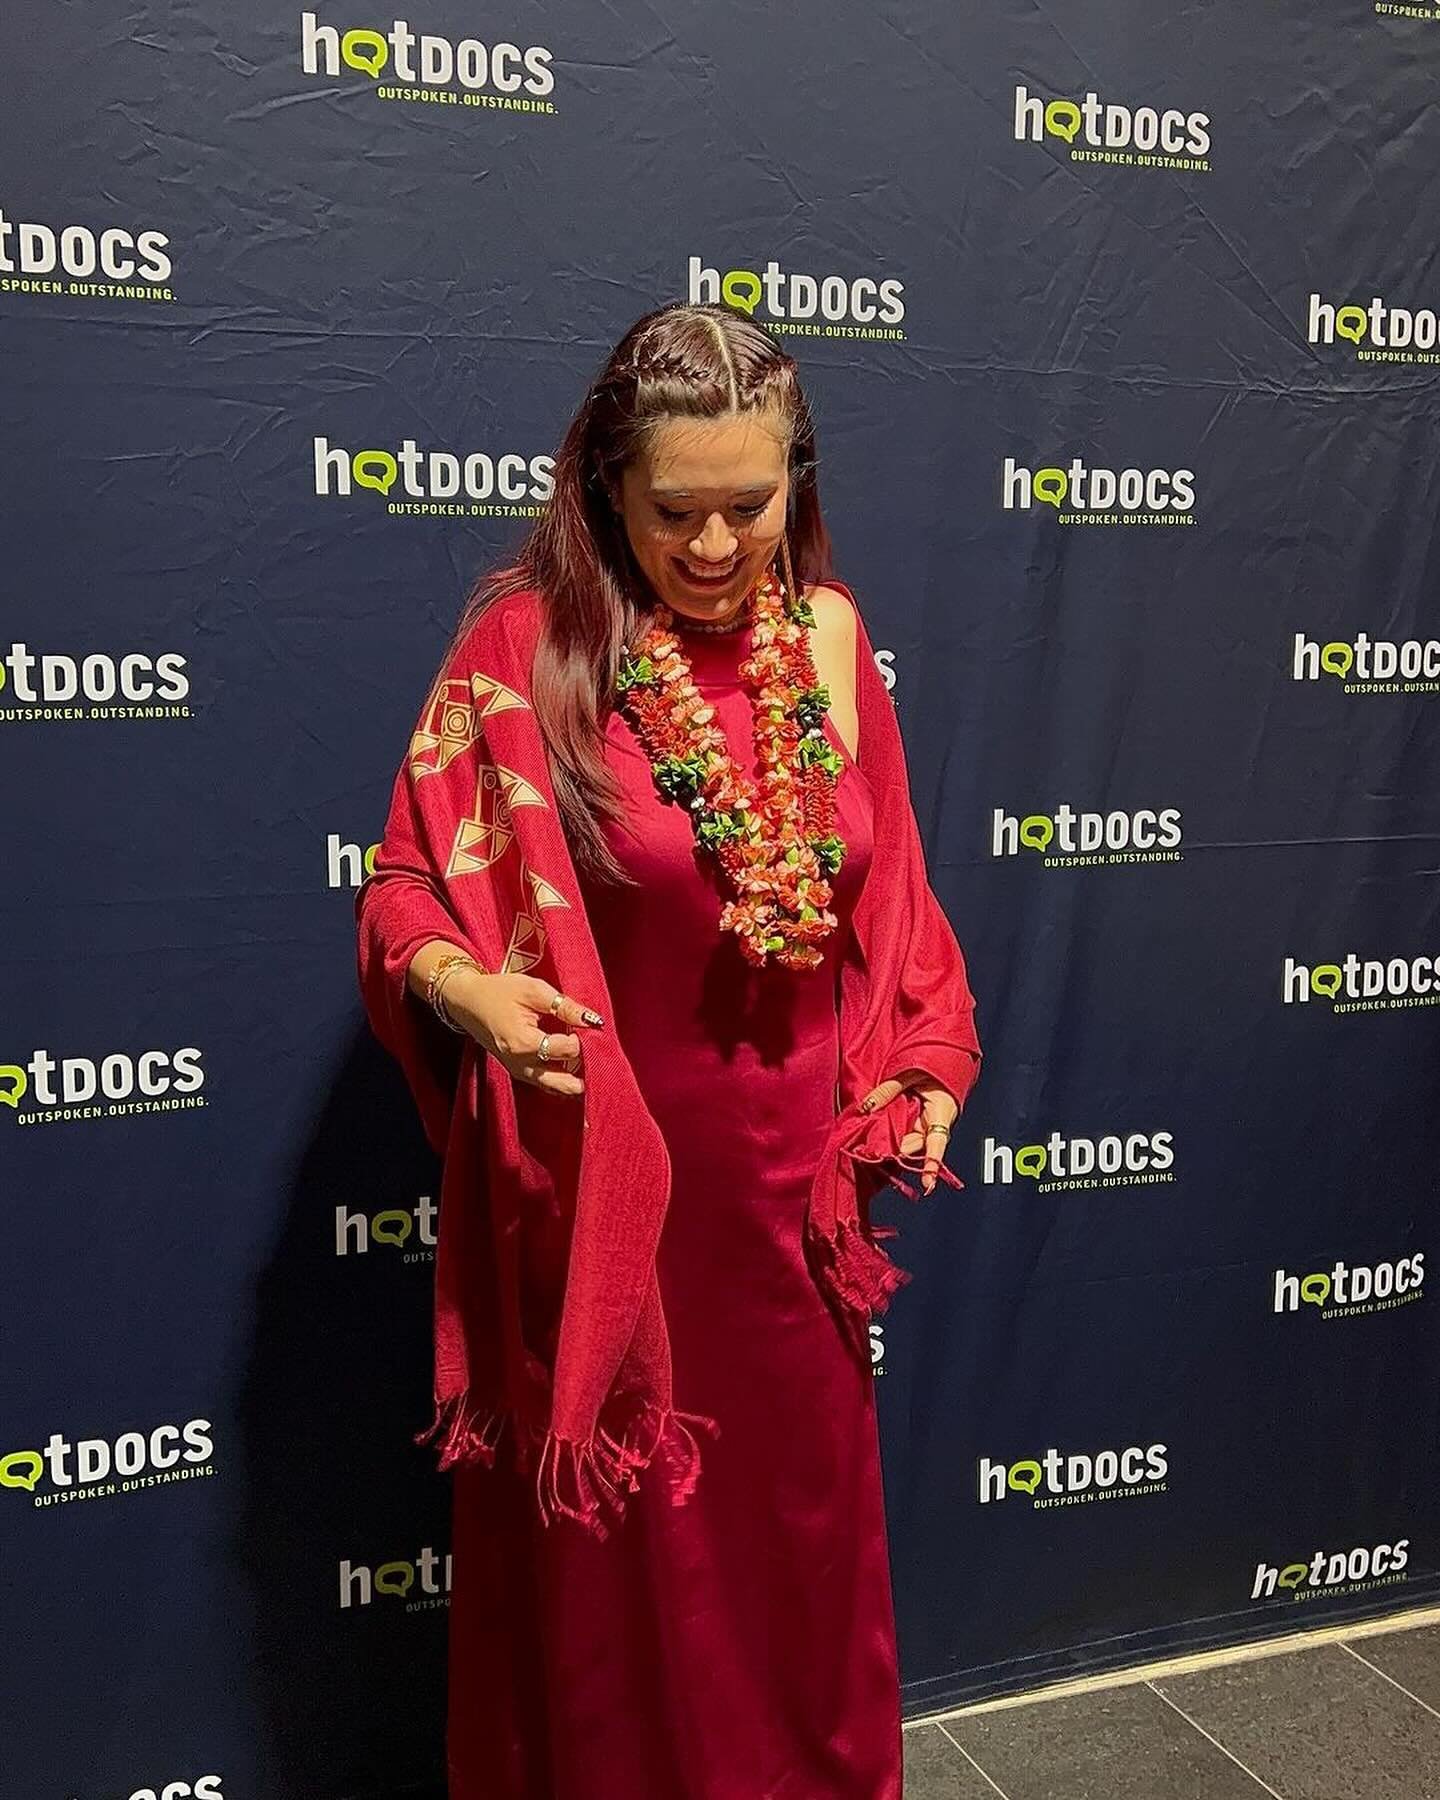 Mahalo to all for representing the families who put themselves out there to share this story, the very spirit of our stance for the mauna. Repost from @jalena.kl
&bull;
Hot Docs was everything we could have hoped for and more! As Erin said, April 28t